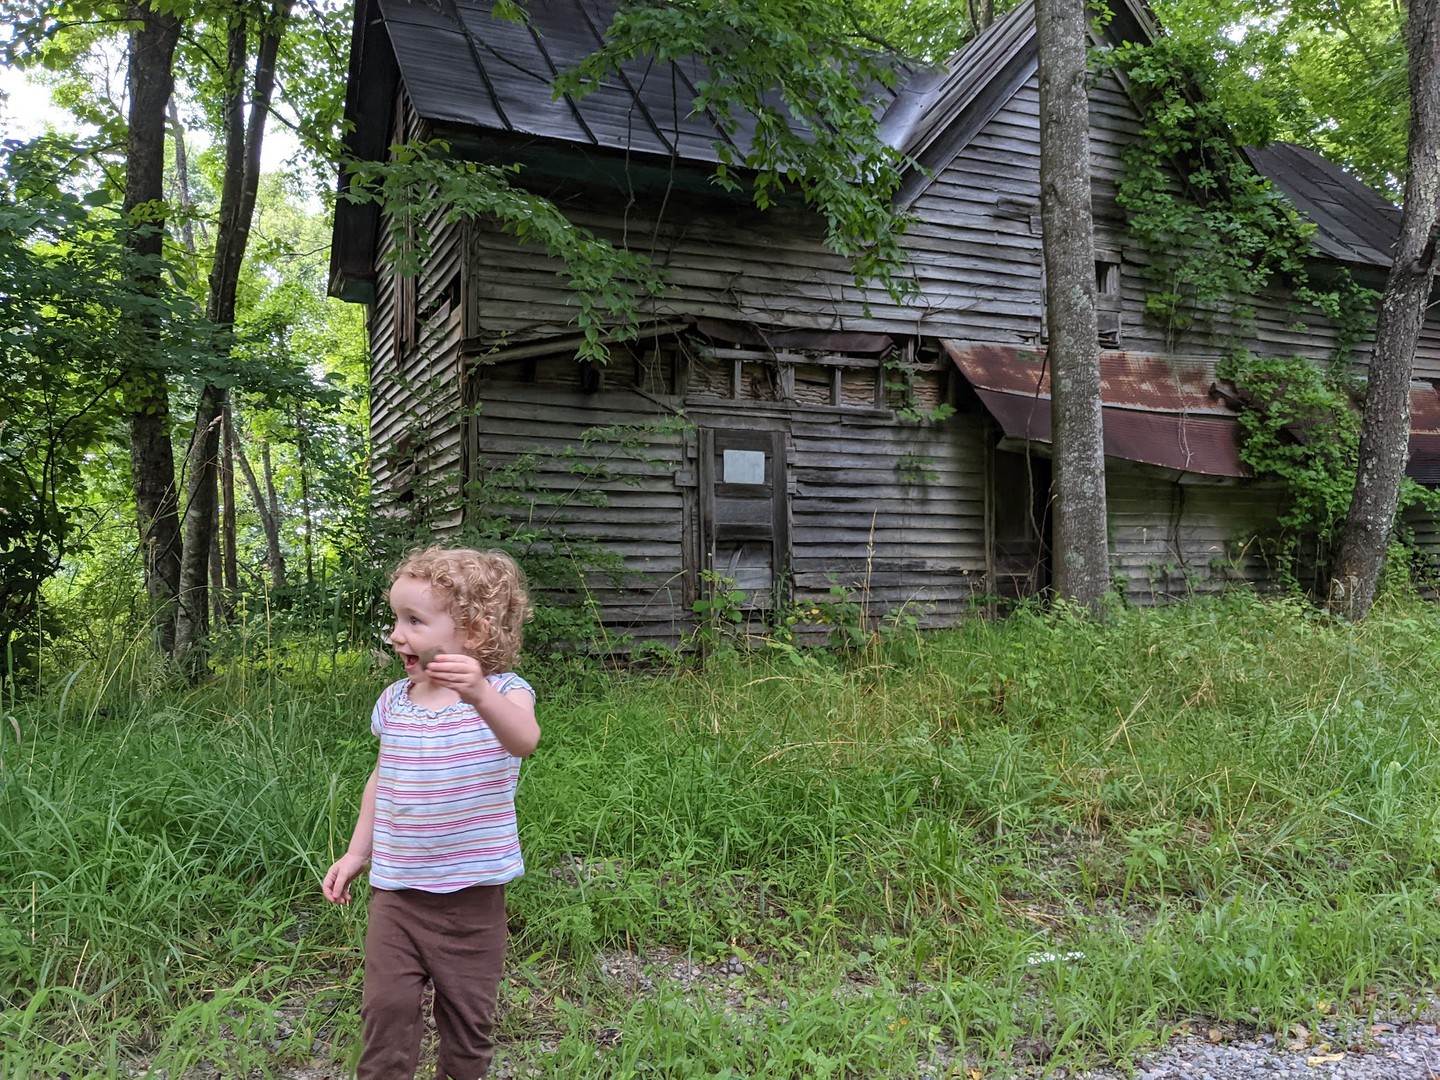 Happy Monday!

Who else loves old buildings? We do, and it's definitely a family thing! Makes us think "if these walls could talk..."

#nativeground #oldbuildings #ashevillenc #elkcreekva #828isgreat #appalachia #mountains #mountainlife #familyfun #folklore #folklife